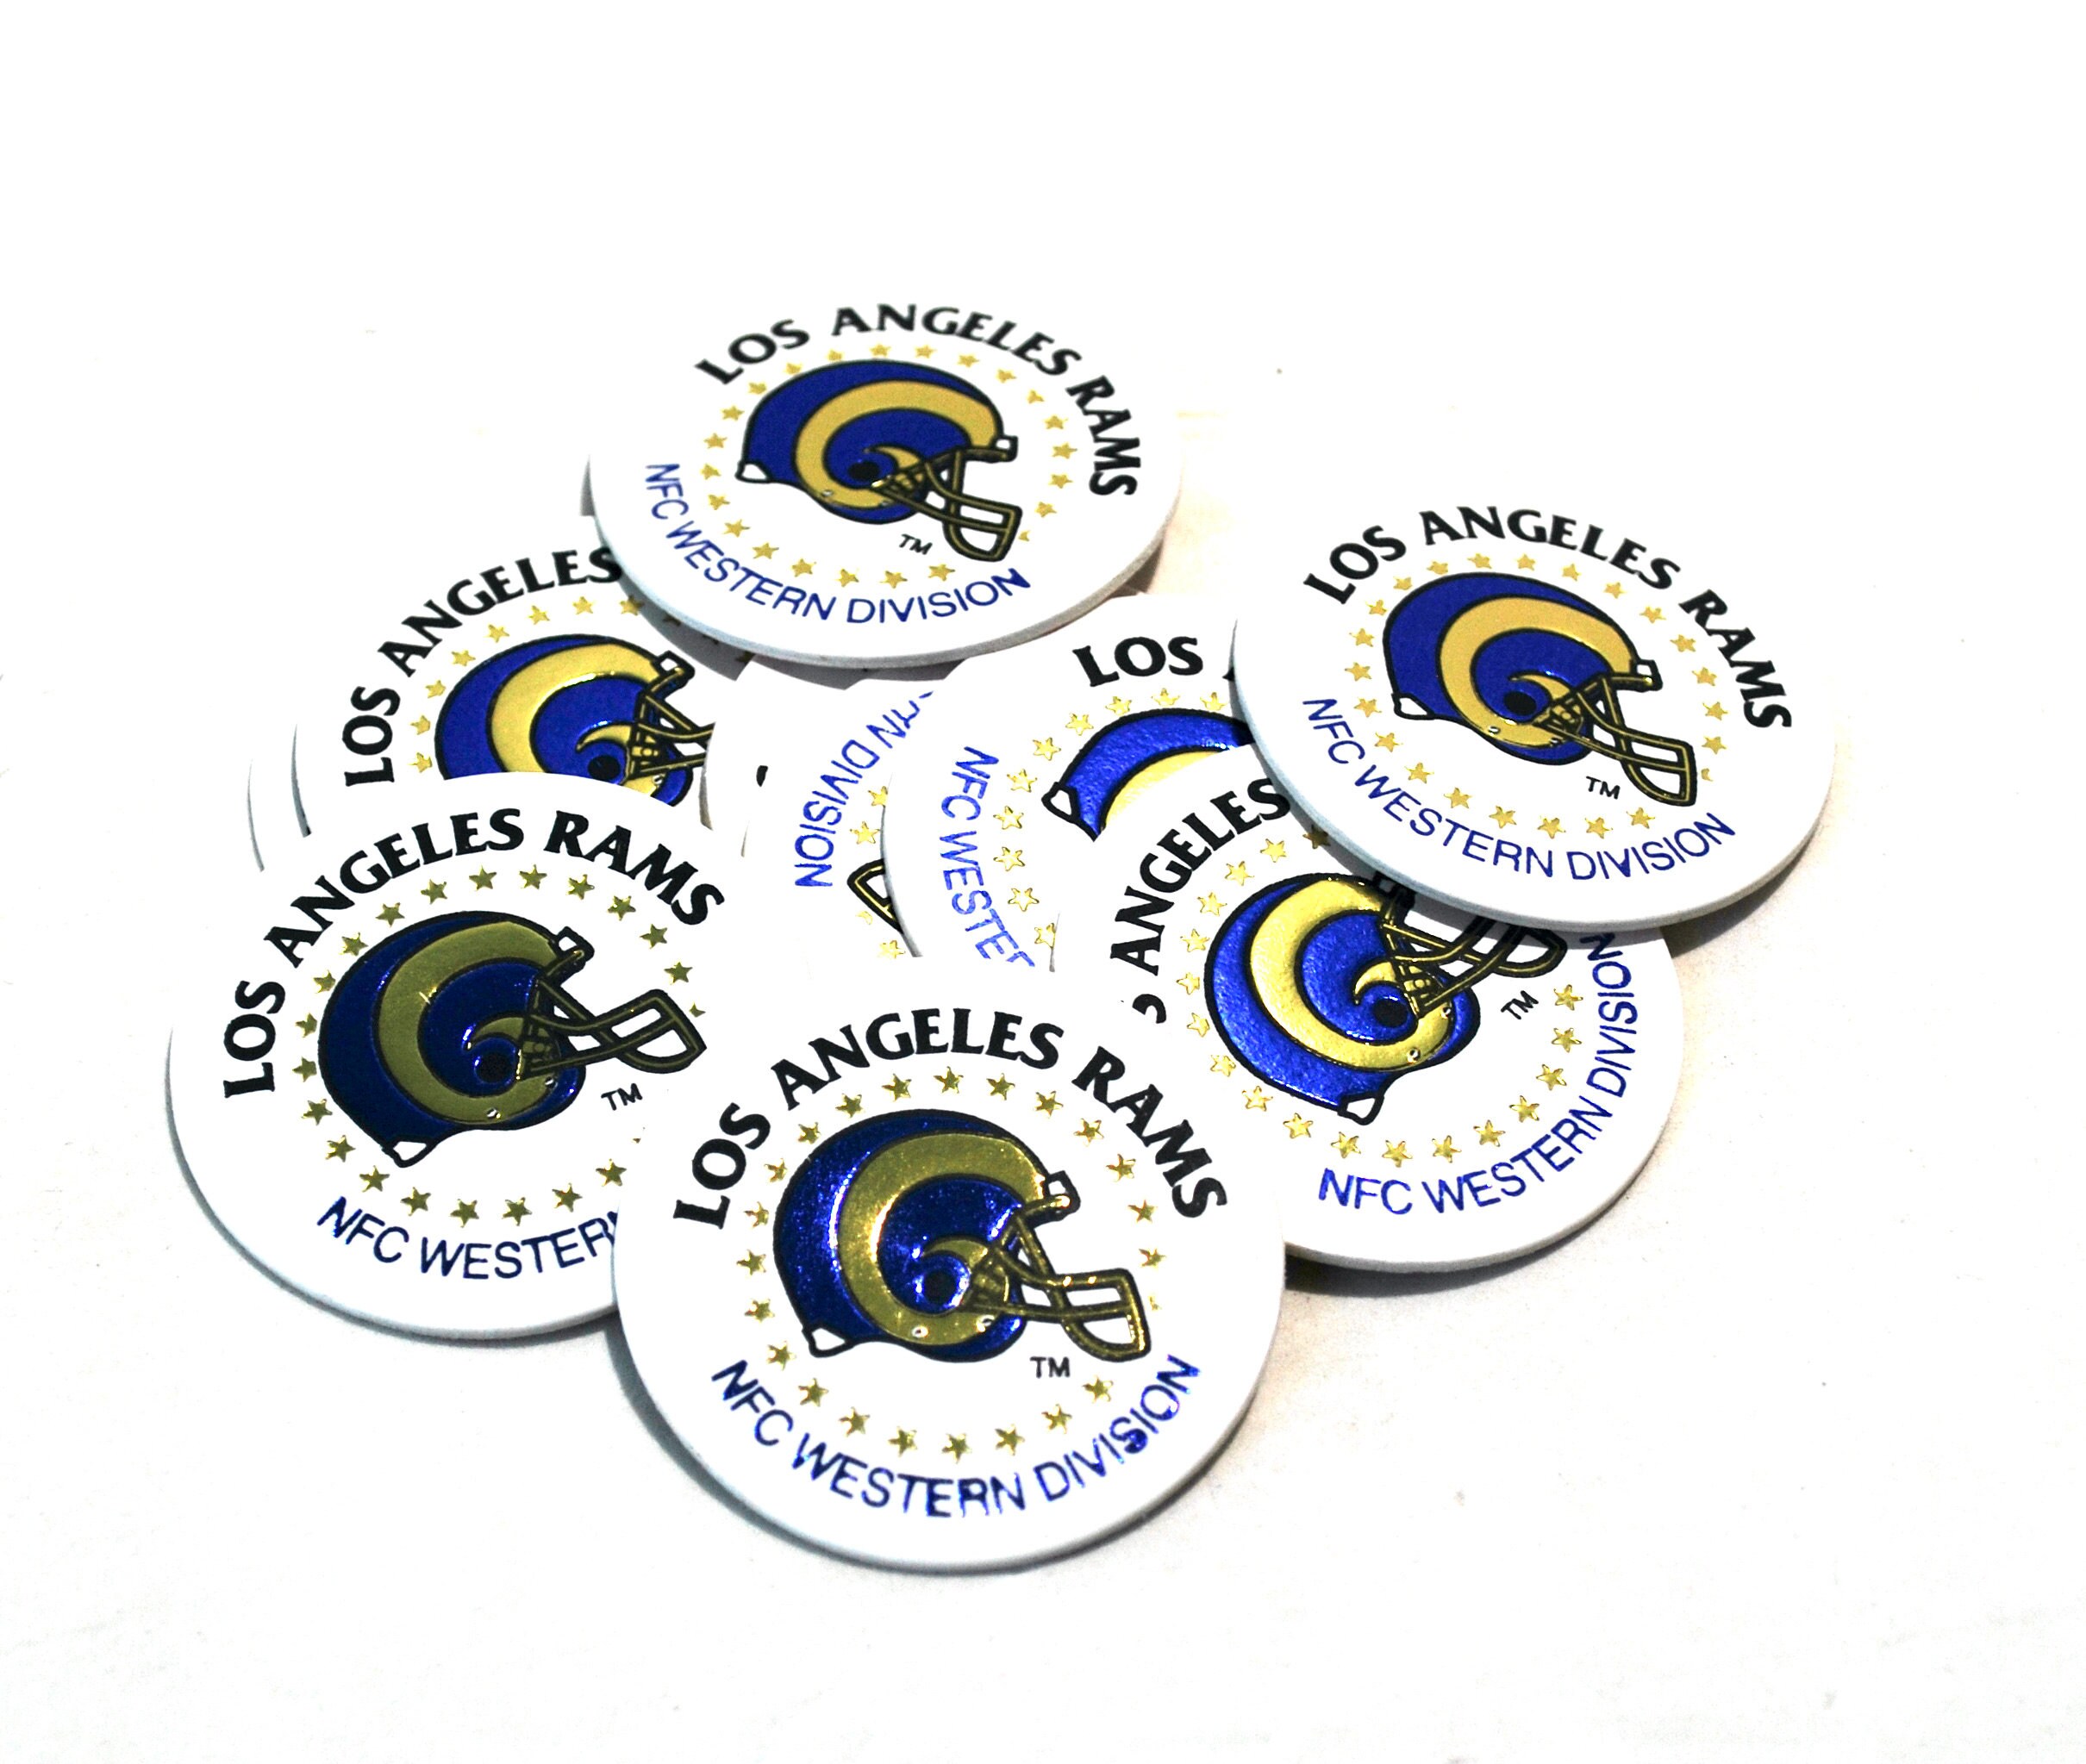 10 Los Angeles Rams Football Pog Milk Caps Made By Laserforms 1994 Matthew Stafford Aaron Donald Nfl Gameday